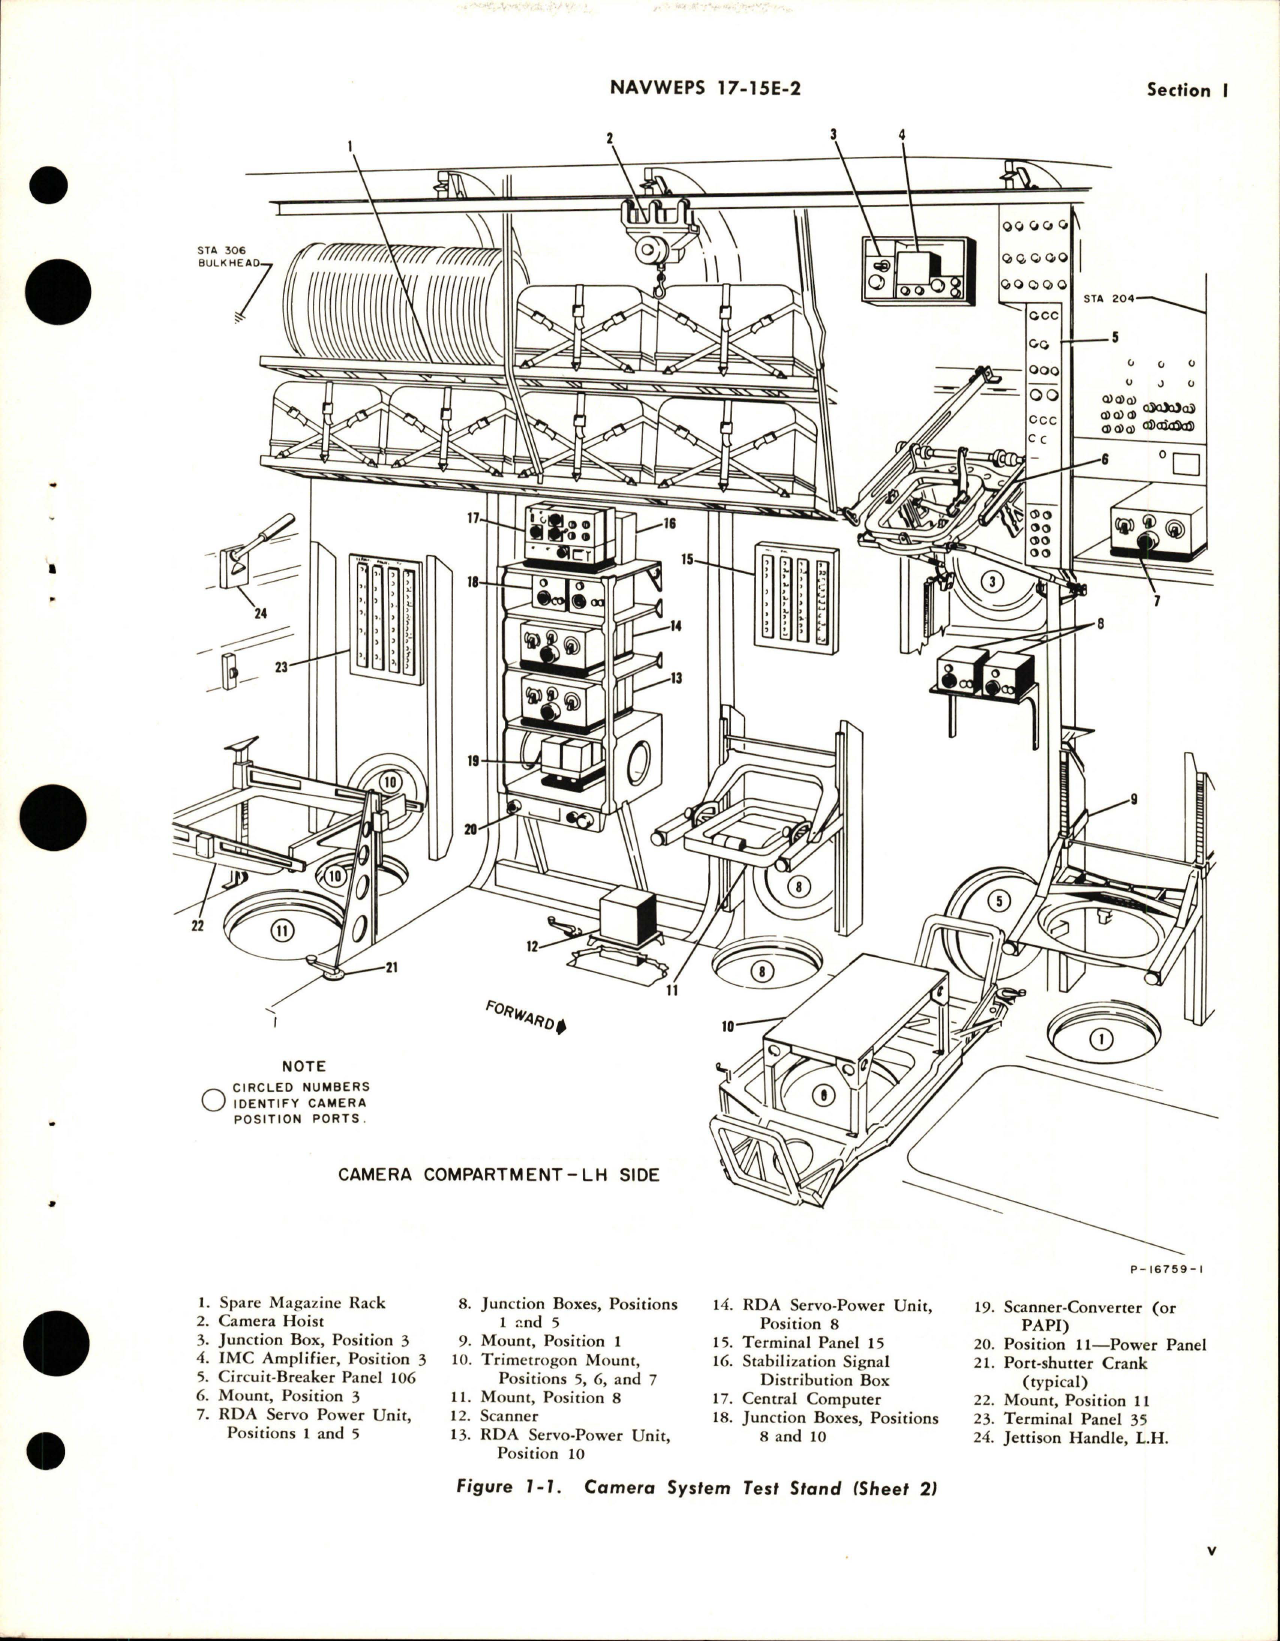 Sample page 7 from AirCorps Library document: Operation and Maintenance Instructions for Test Stand-Camera System - Part K5665262 